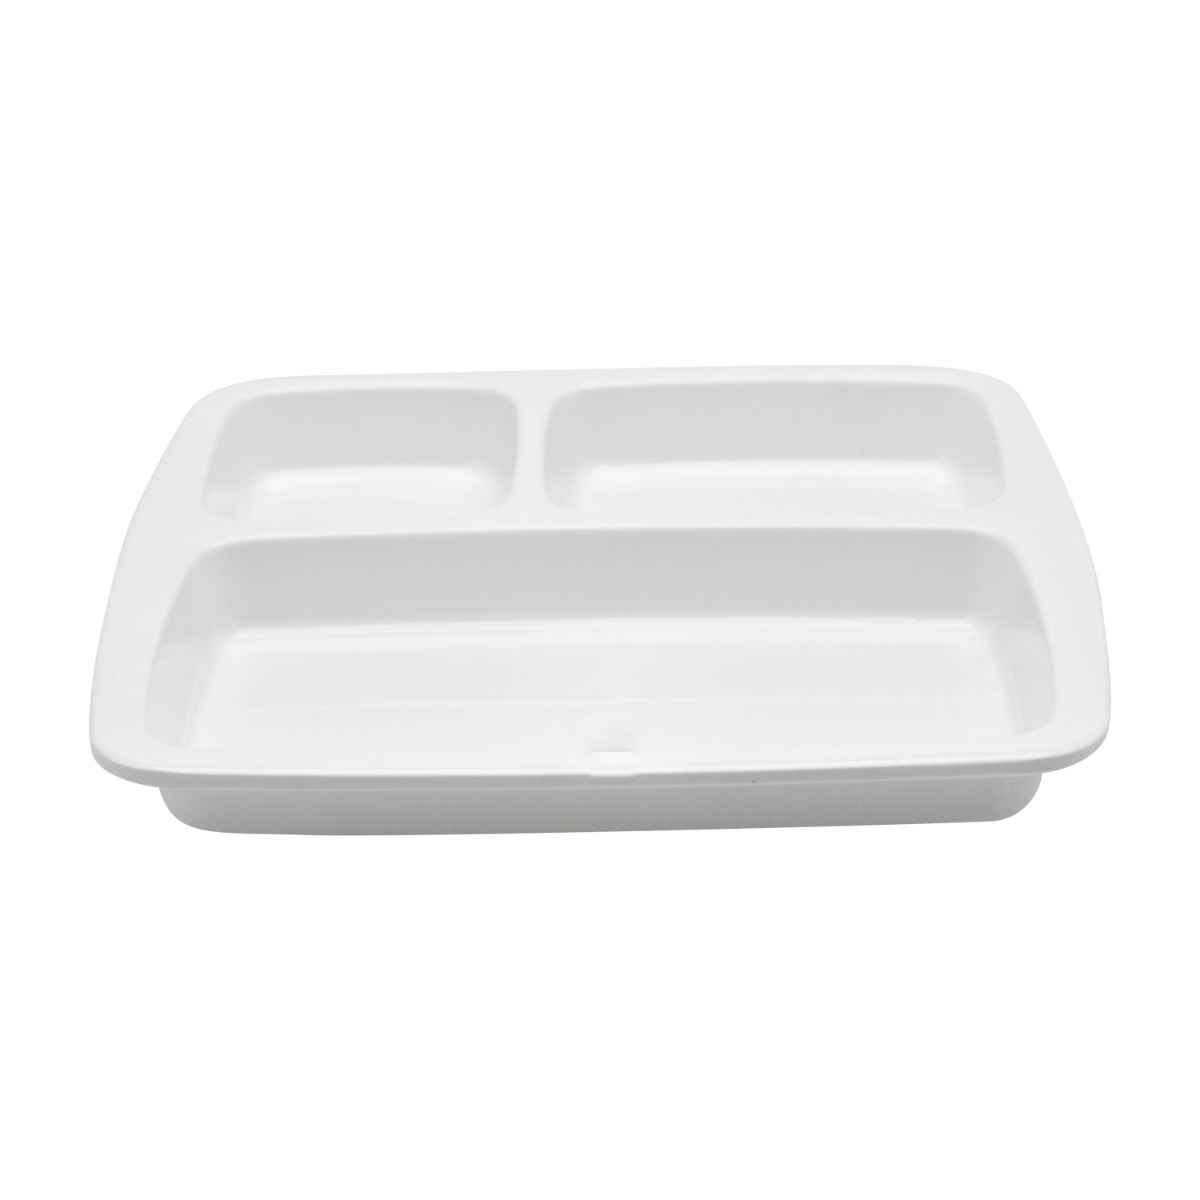 Dinewell Melamine 3 Partition Tray White